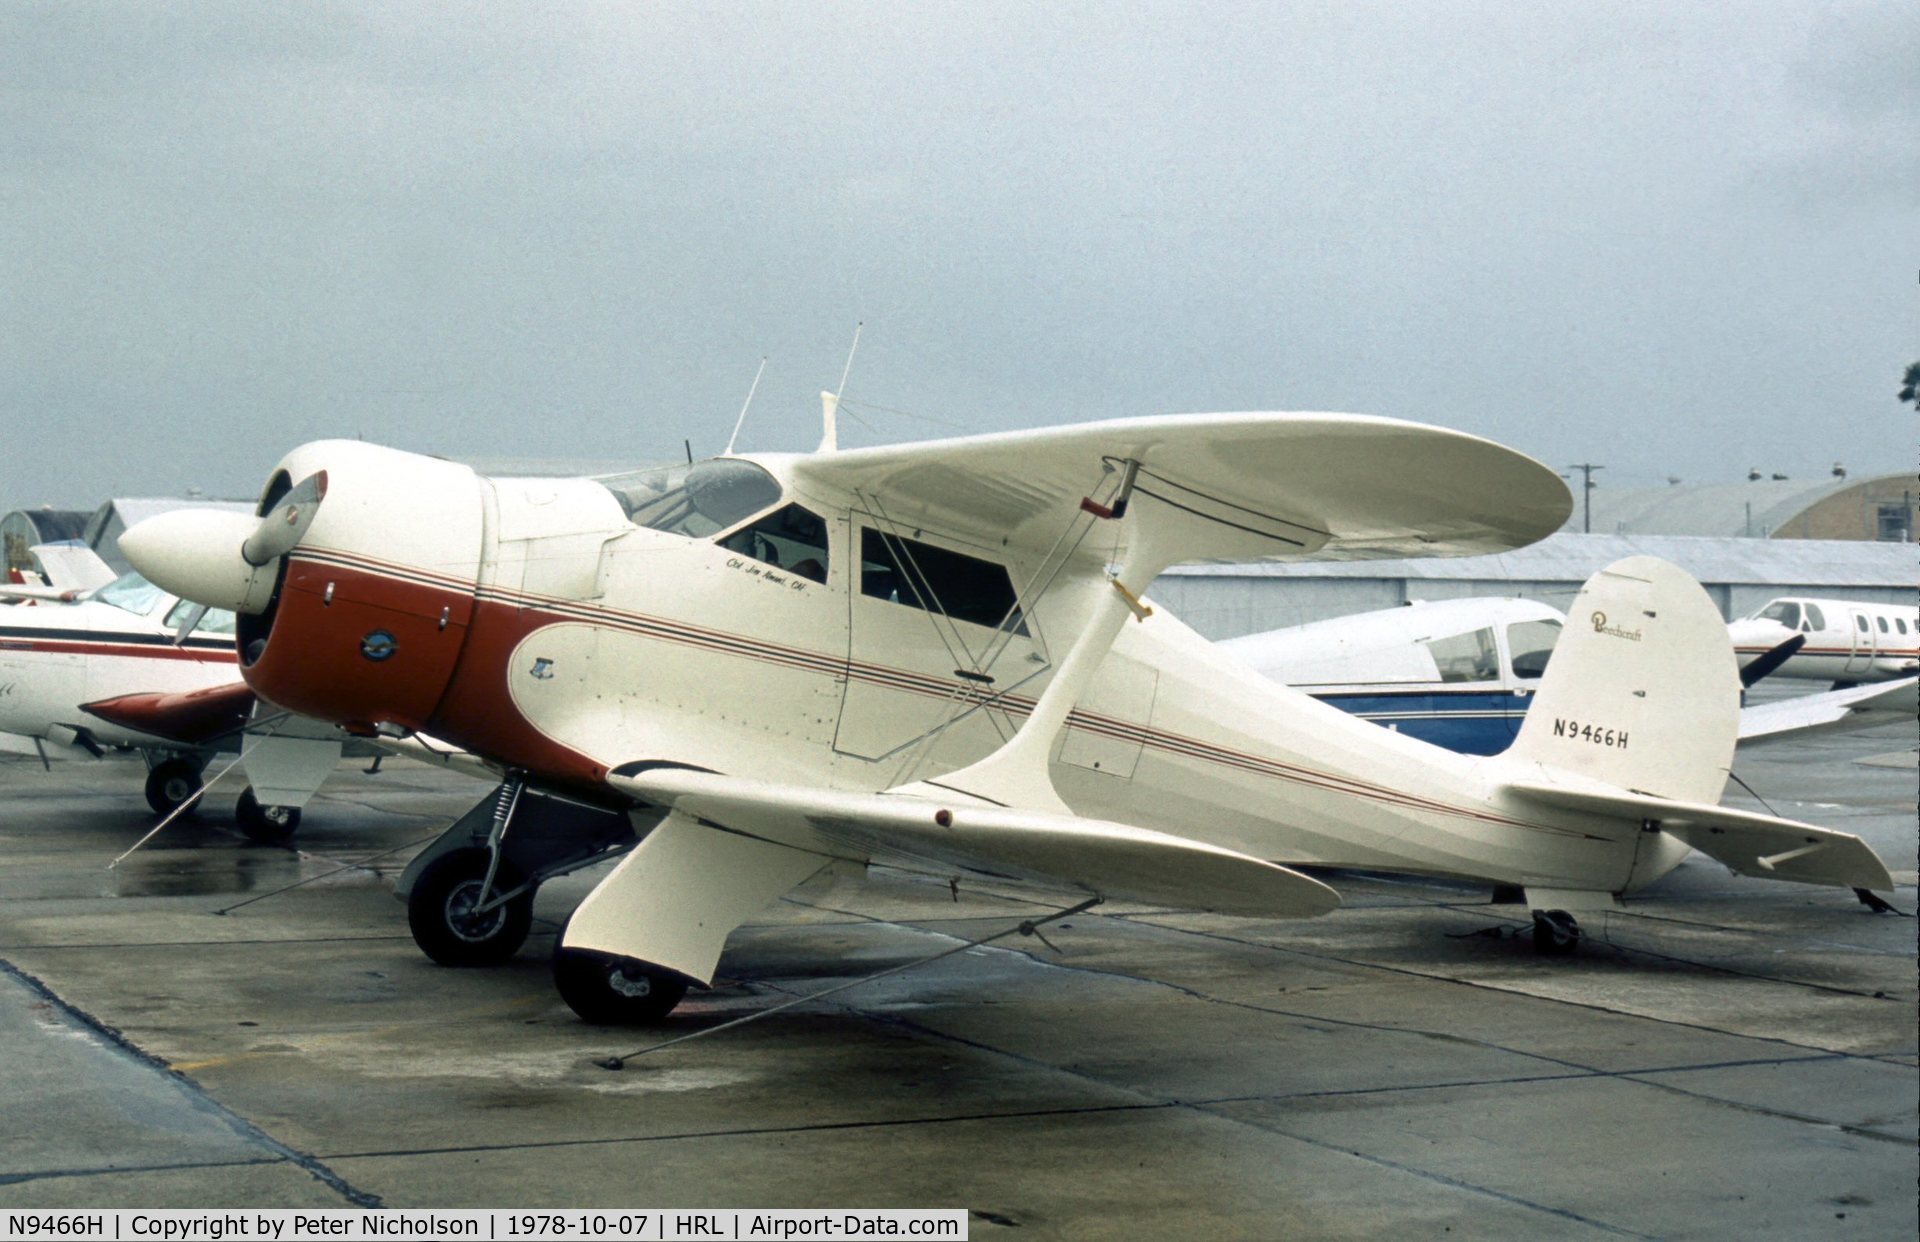 N9466H, 1944 Beech D17S Staggerwing C/N 6688, Beech UC-43 Staggerwing seen at the 1978 Confederate Air Force's Harlingen Airshow.